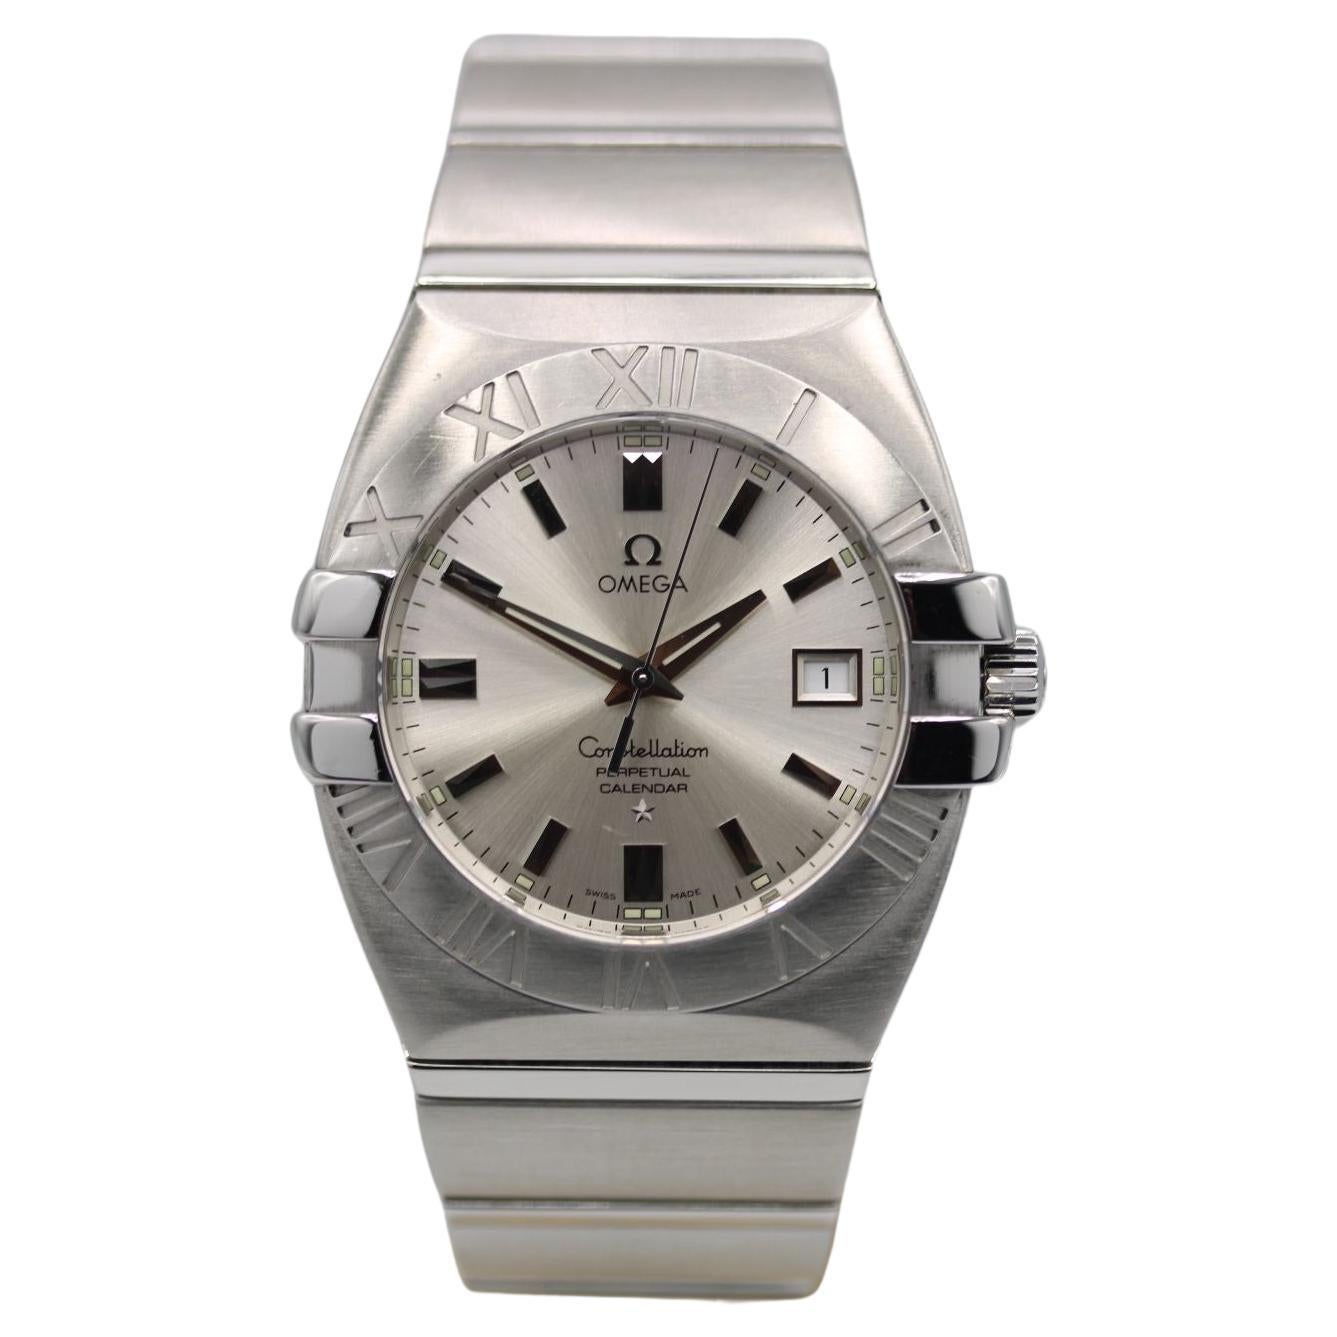 Is an Omega Constellation watch gold?